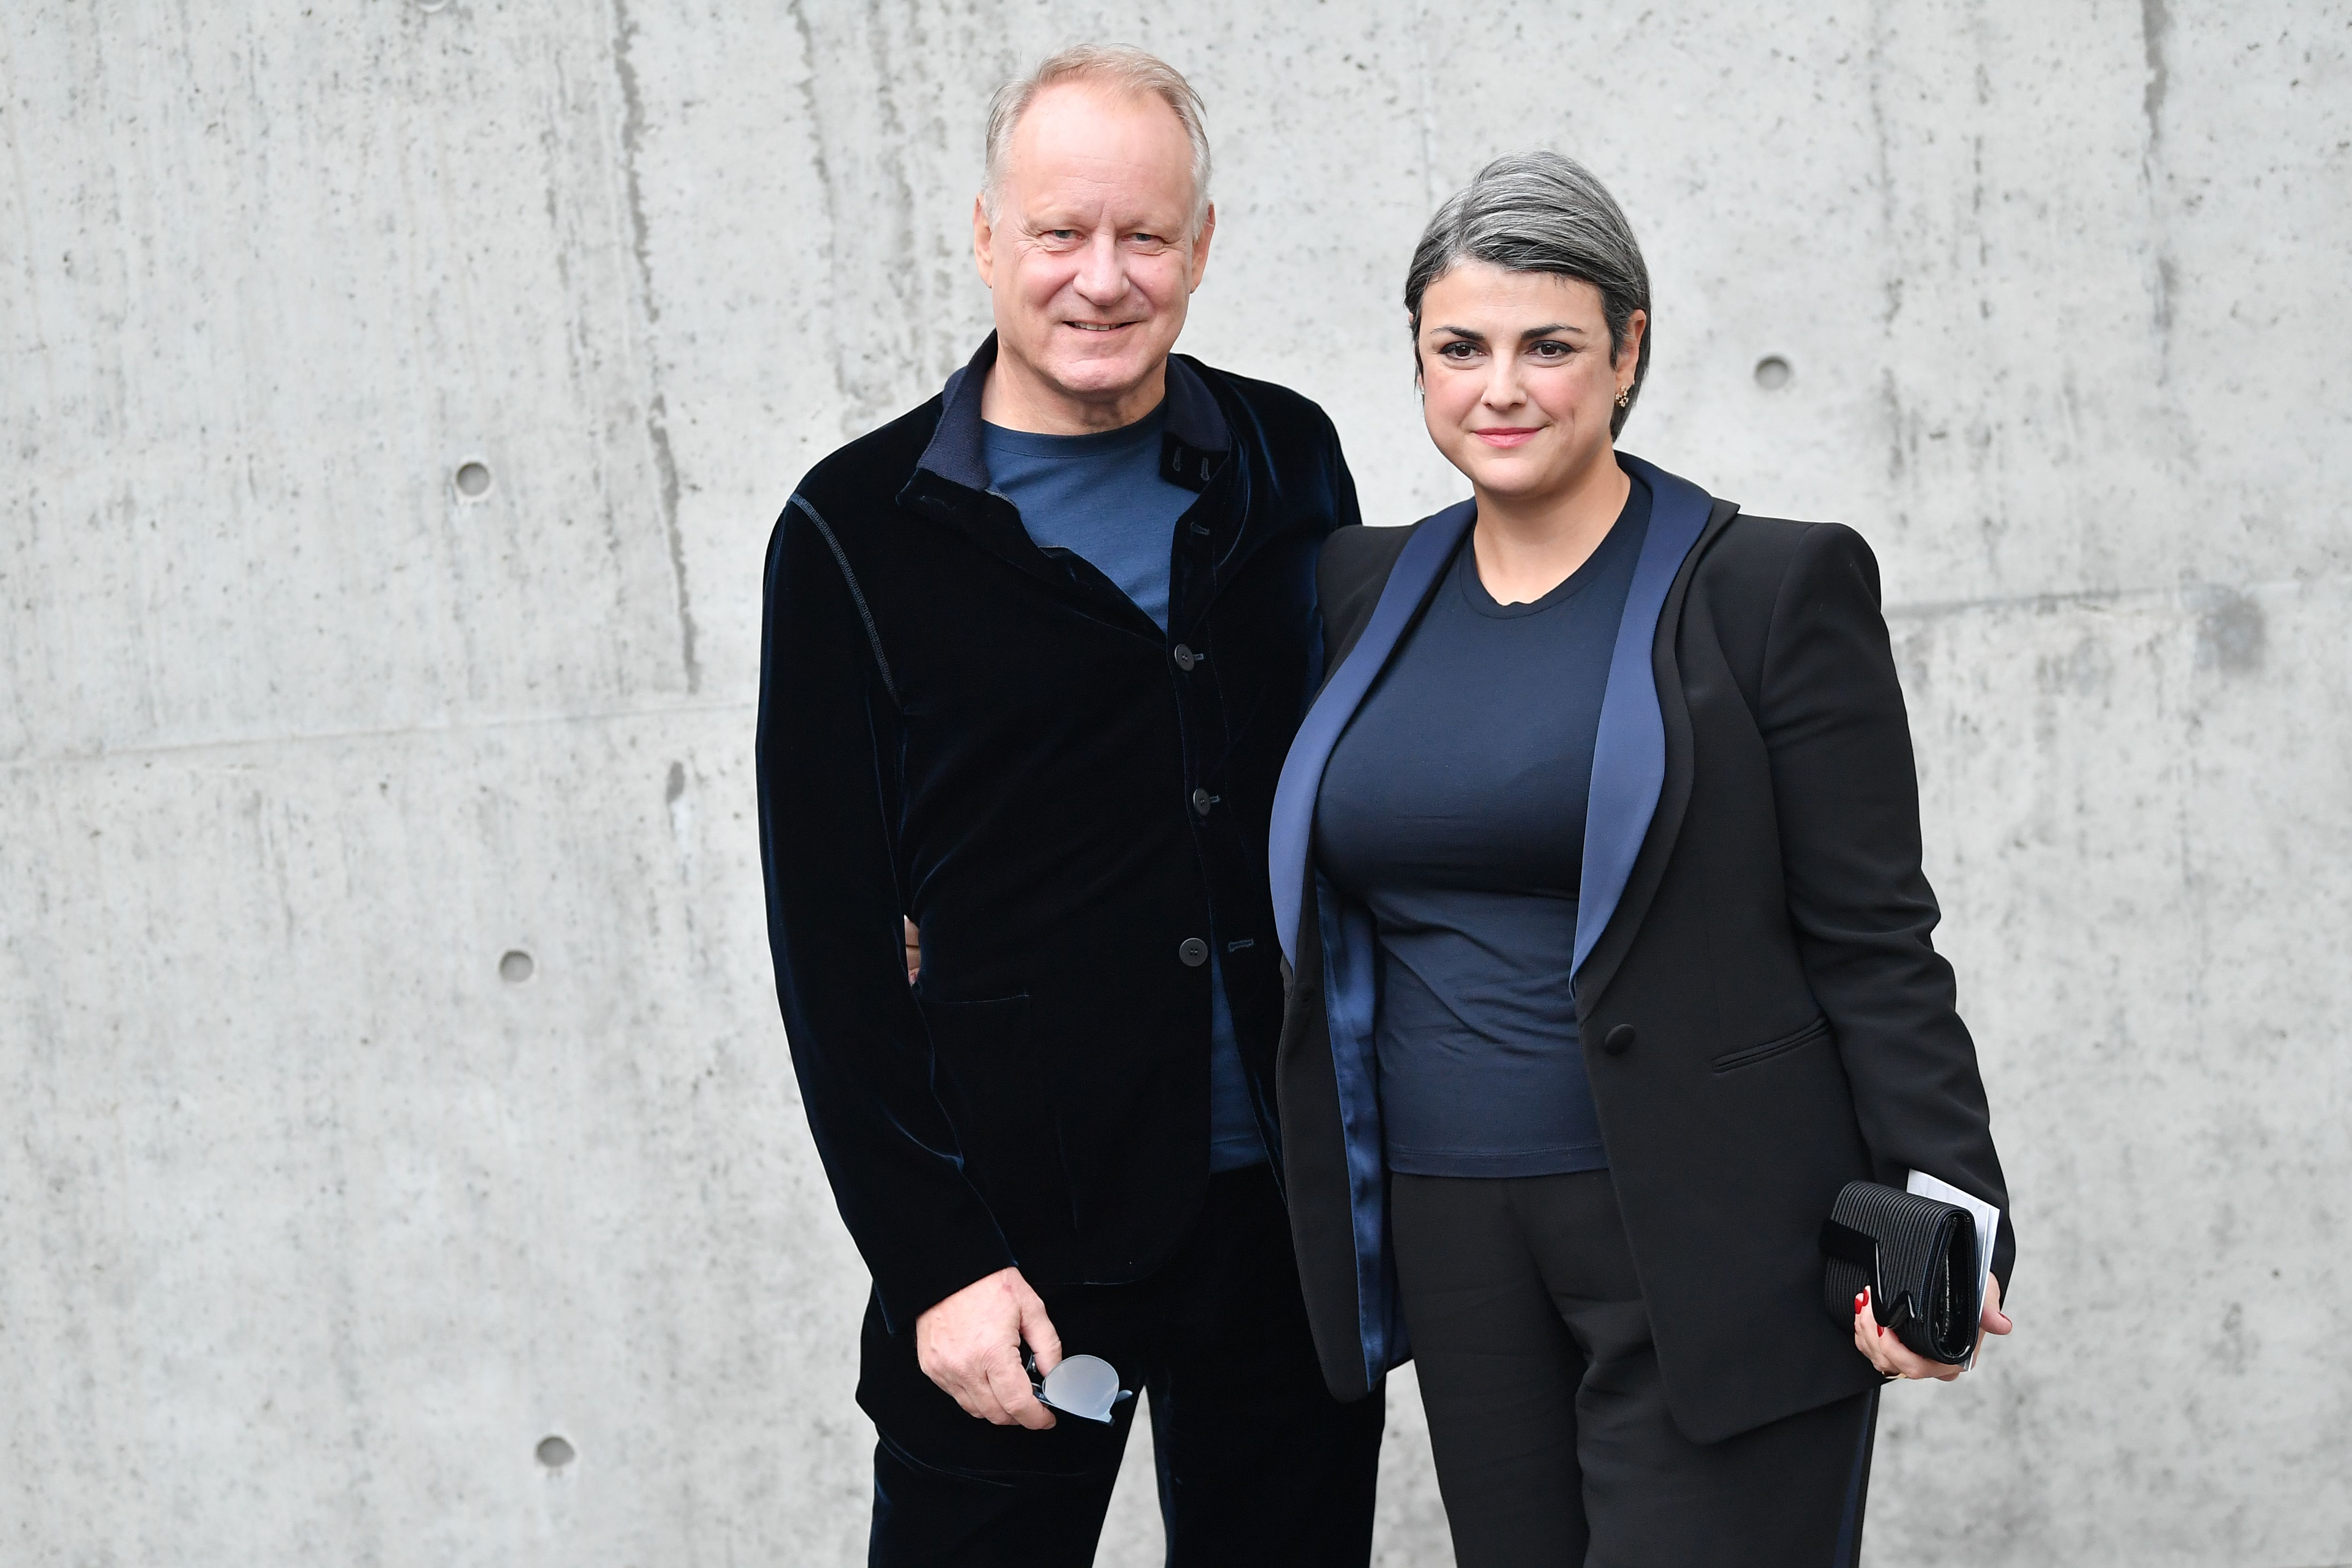 Stellan Skarsgard and Megan Everett at the Giorgio Armani fashion show on January 13, 2020, in Milan, Italy. | Source: Getty Images